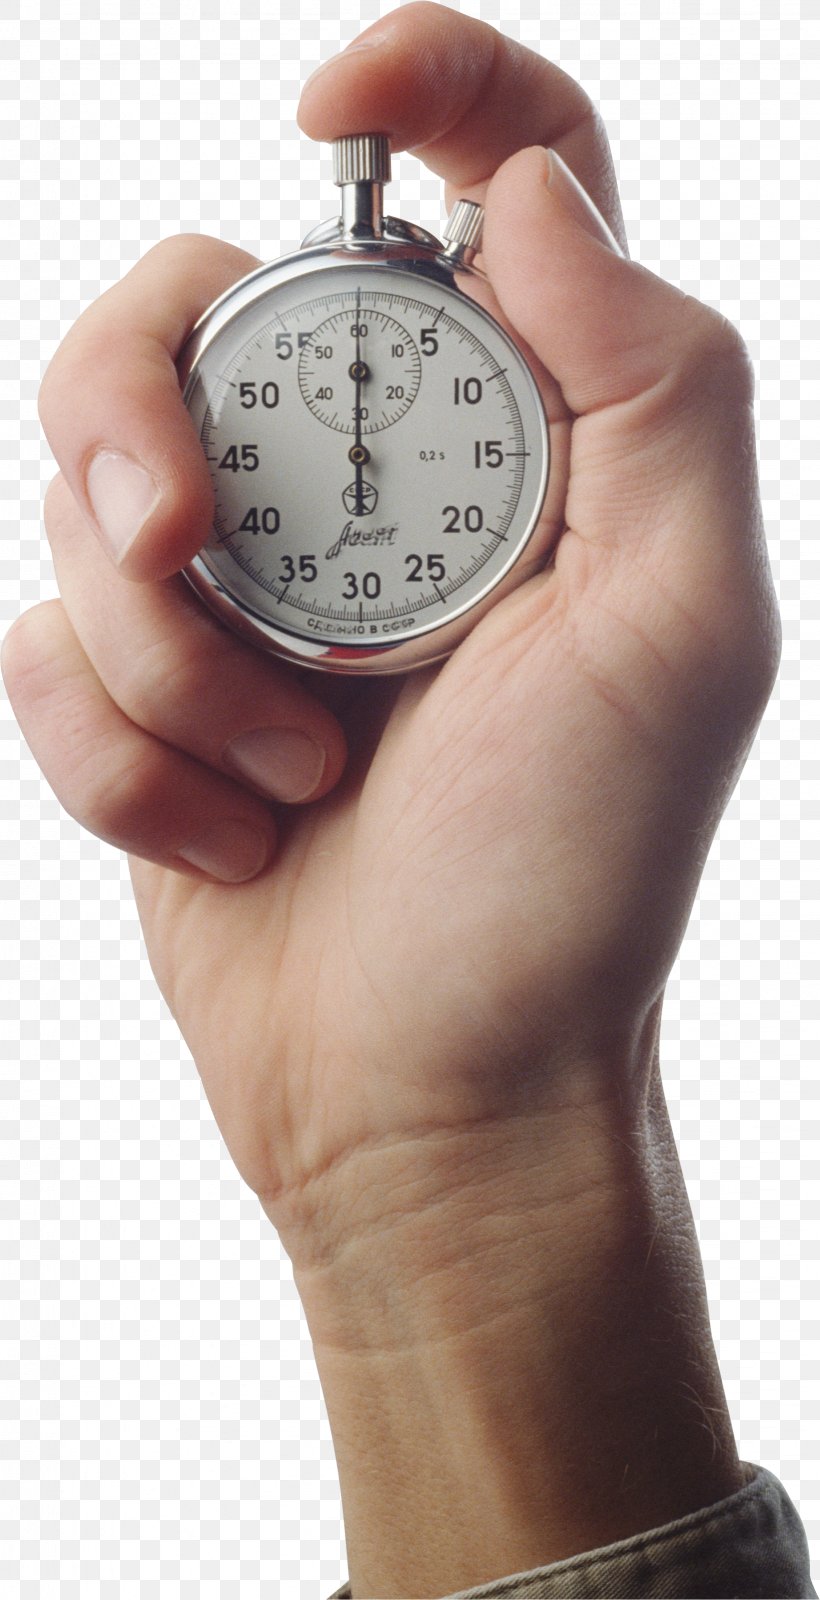 Stopwatch Image File Formats Clip Art, PNG, 1636x3194px, Stopwatch, Clock, Hand, Image File Formats, Product Design Download Free